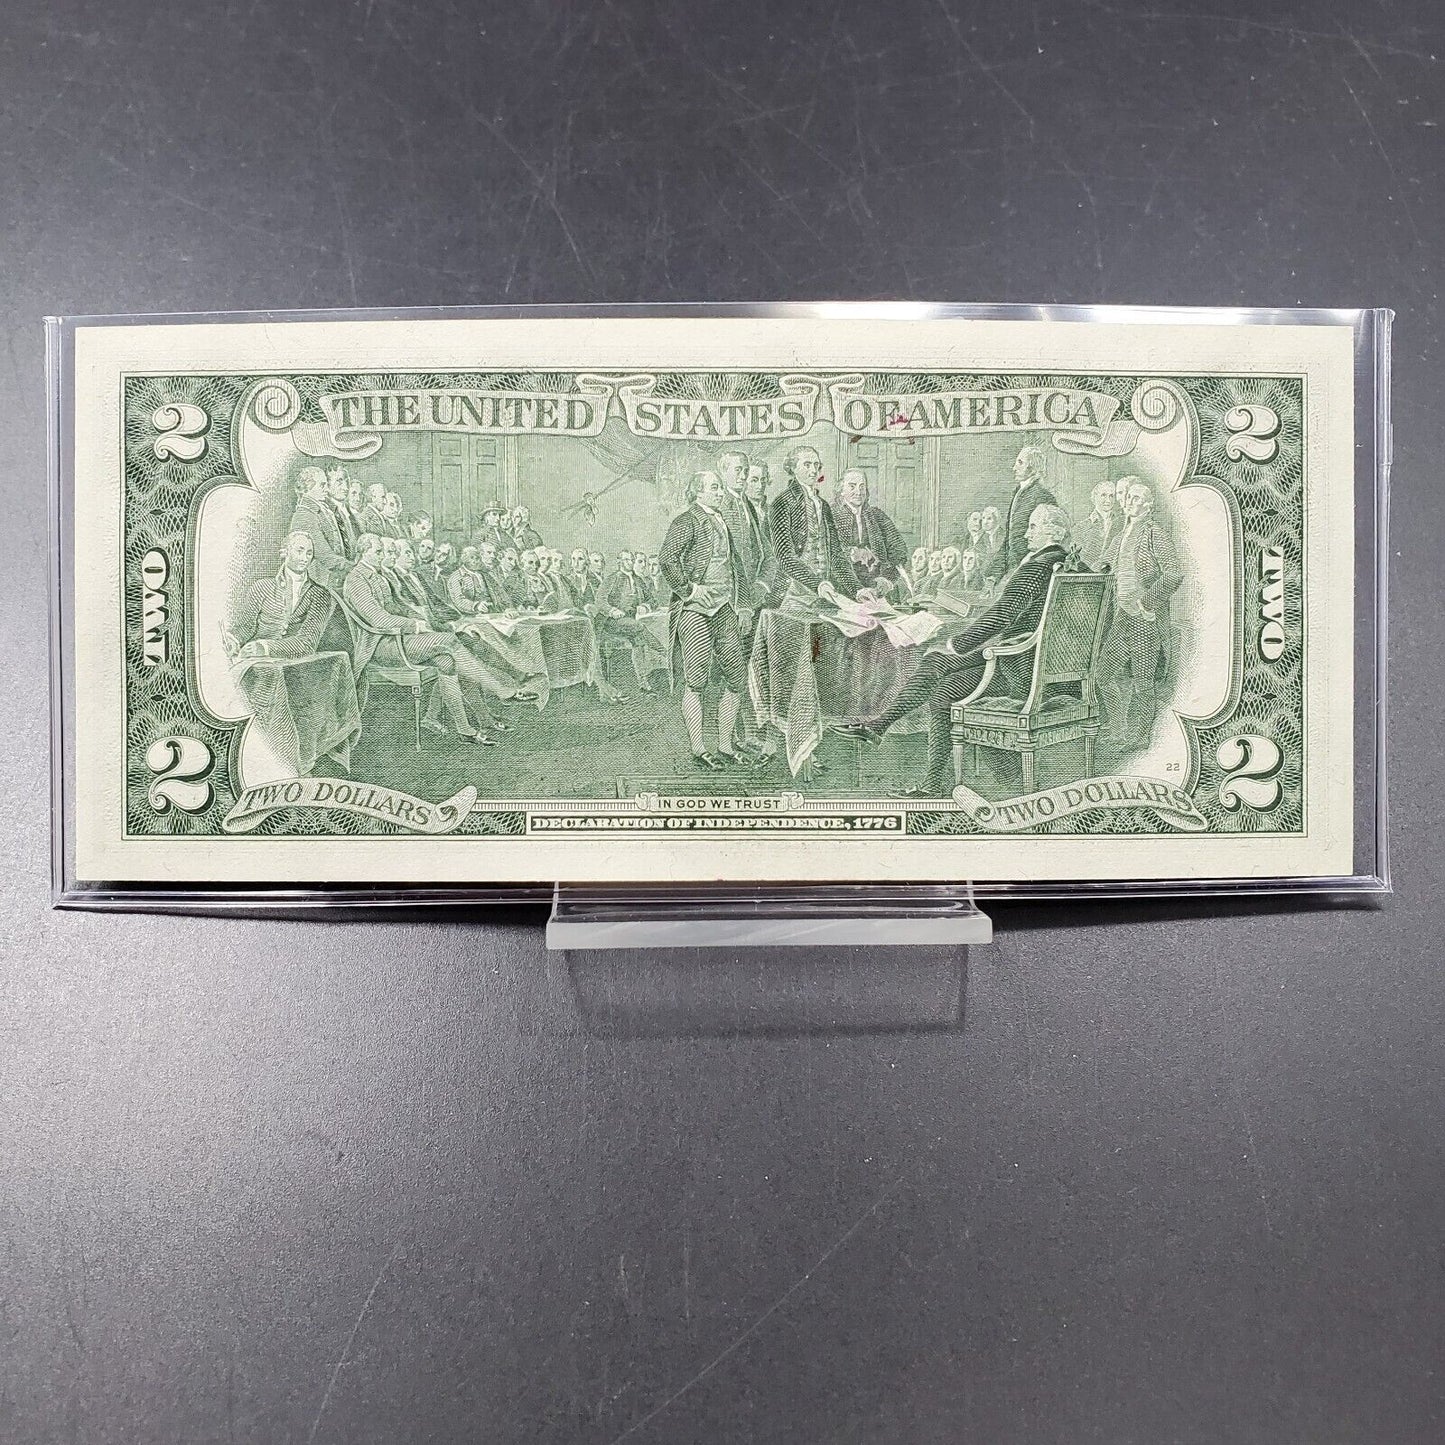 1976 FRN Federal Reserve Postal NOTE Bicentennial Unc WALL STREET NYC New York #